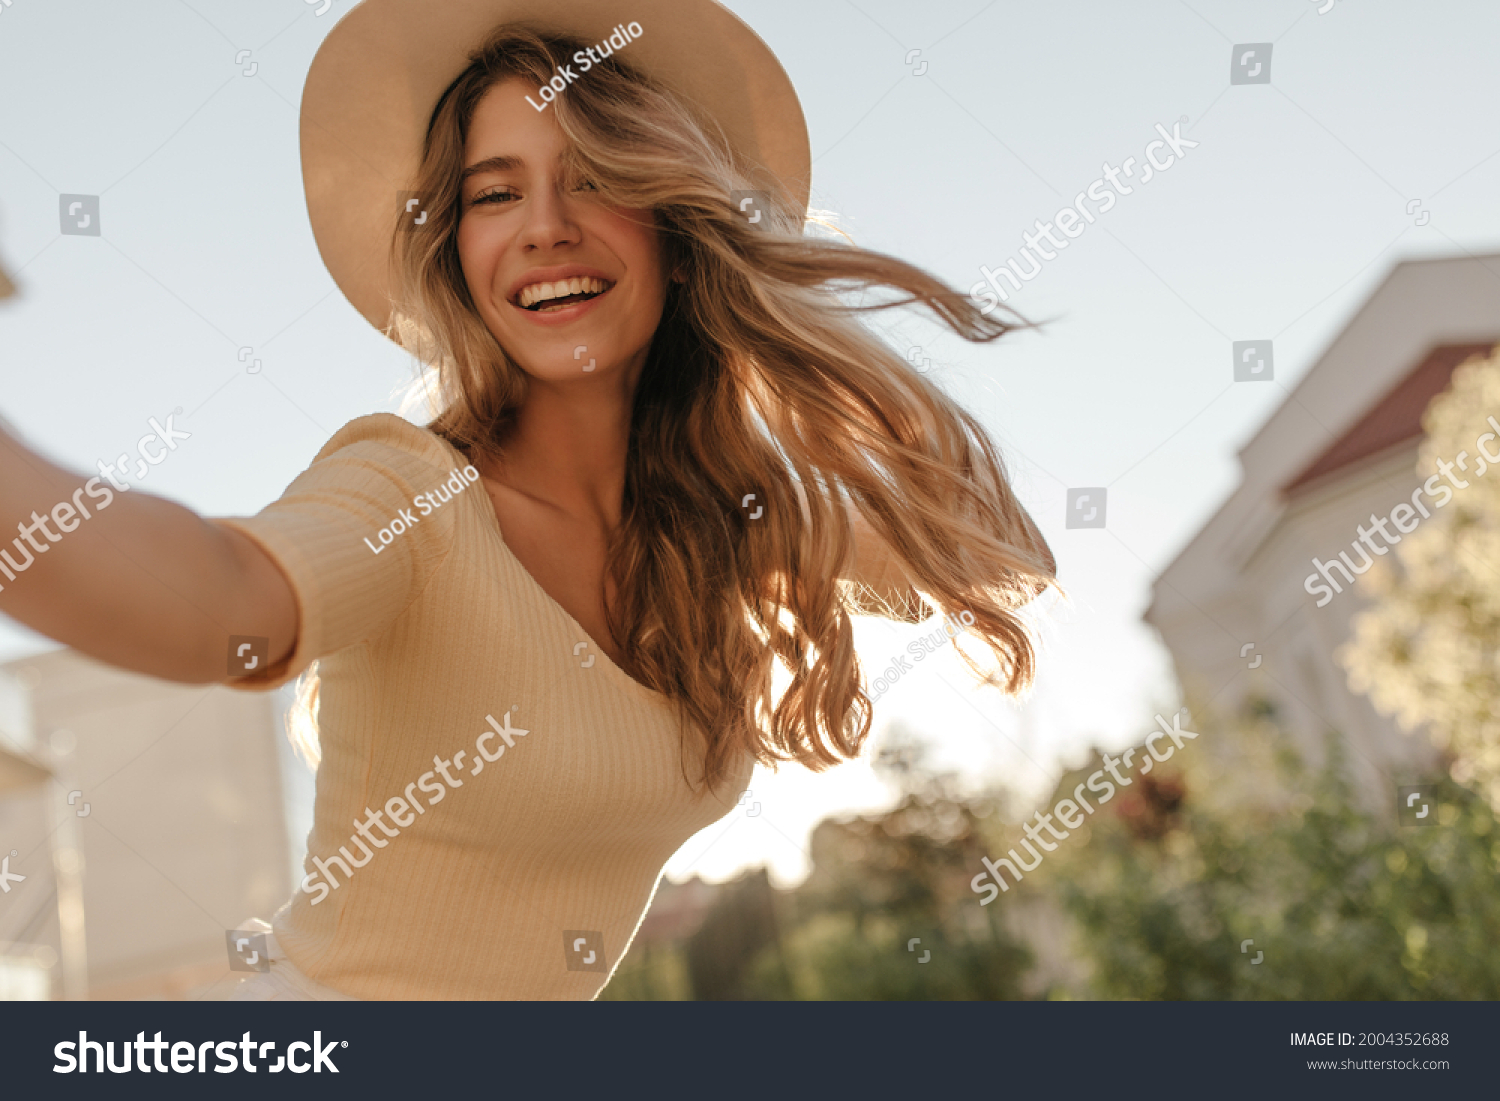 Happy young model makes photo holding camera in hand close-up. Her hair is flying in wind, she is wearing hat. Outdoor photo. #2004352688